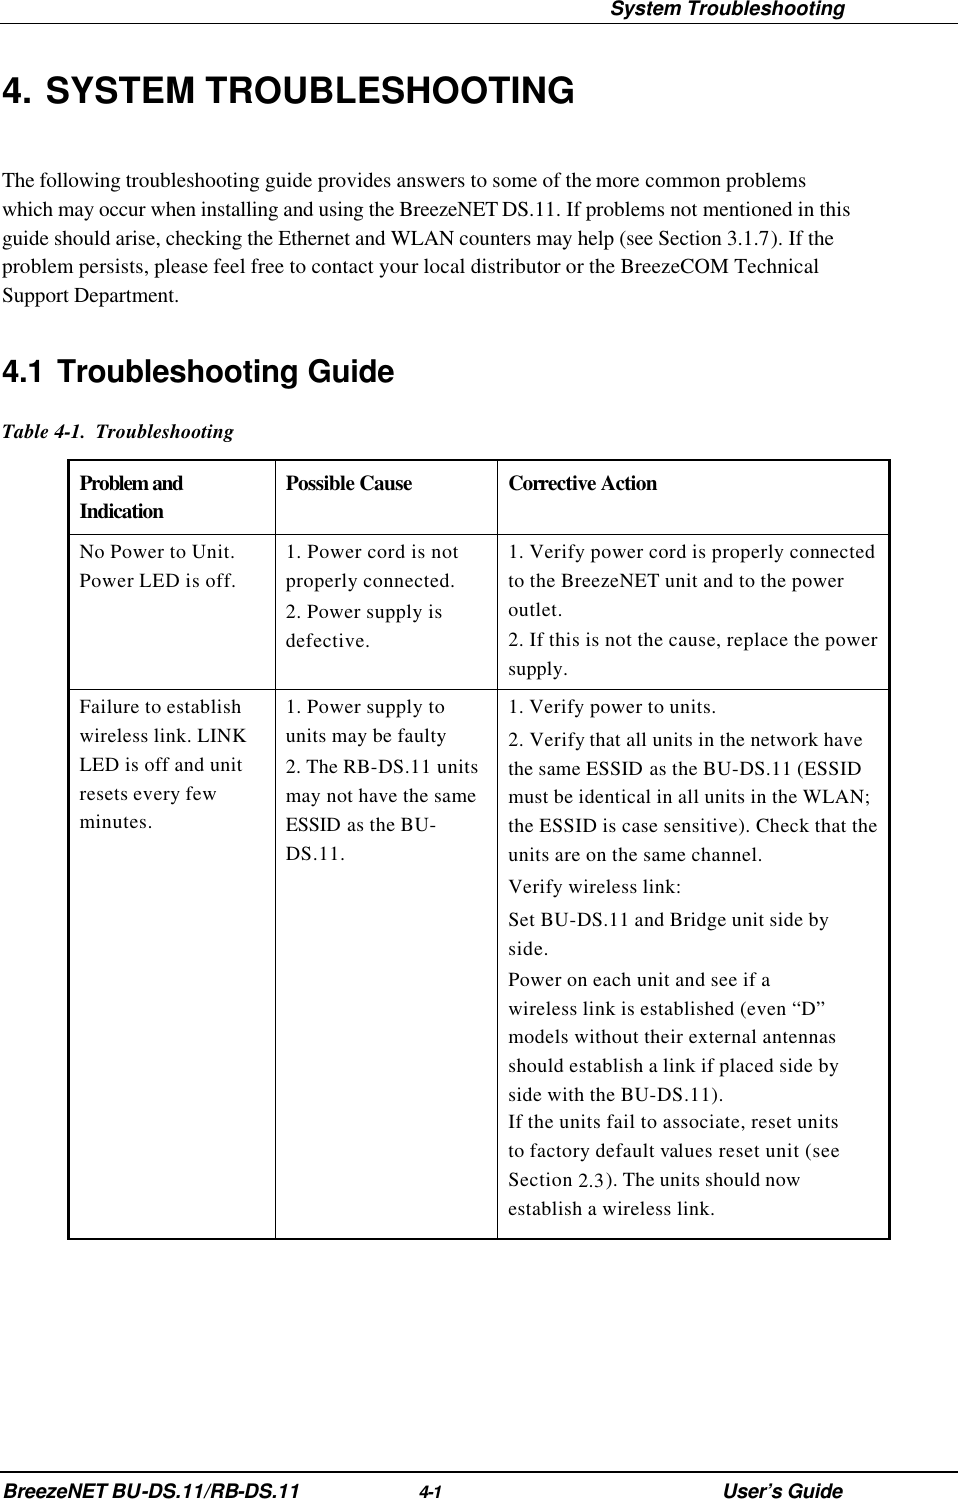  System Troubleshooting BreezeNET BU-DS.11/RB-DS.11 4-1 User’s Guide 4. SYSTEM TROUBLESHOOTING The following troubleshooting guide provides answers to some of the more common problems which may occur when installing and using the BreezeNET DS.11. If problems not mentioned in this guide should arise, checking the Ethernet and WLAN counters may help (see Section 3.1.7). If the problem persists, please feel free to contact your local distributor or the BreezeCOM Technical Support Department. 4.1 Troubleshooting Guide Table 4-1.  Troubleshooting Problem and Indication Possible Cause Corrective Action No Power to Unit. Power LED is off. 1. Power cord is not properly connected.  2. Power supply is defective. 1. Verify power cord is properly connected to the BreezeNET unit and to the power outlet.  2. If this is not the cause, replace the power supply. Failure to establish wireless link. LINK LED is off and unit resets every few minutes. 1. Power supply to units may be faulty 2. The RB-DS.11 units may not have the same ESSID as the BU-DS.11. 1. Verify power to units. 2. Verify that all units in the network have the same ESSID as the BU-DS.11 (ESSID must be identical in all units in the WLAN; the ESSID is case sensitive). Check that the units are on the same channel. Verify wireless link: Set BU-DS.11 and Bridge unit side by side. Power on each unit and see if a wireless link is established (even “D” models without their external antennas should establish a link if placed side by side with the BU-DS.11). If the units fail to associate, reset units to factory default values reset unit (see Section 2.3). The units should now establish a wireless link. 